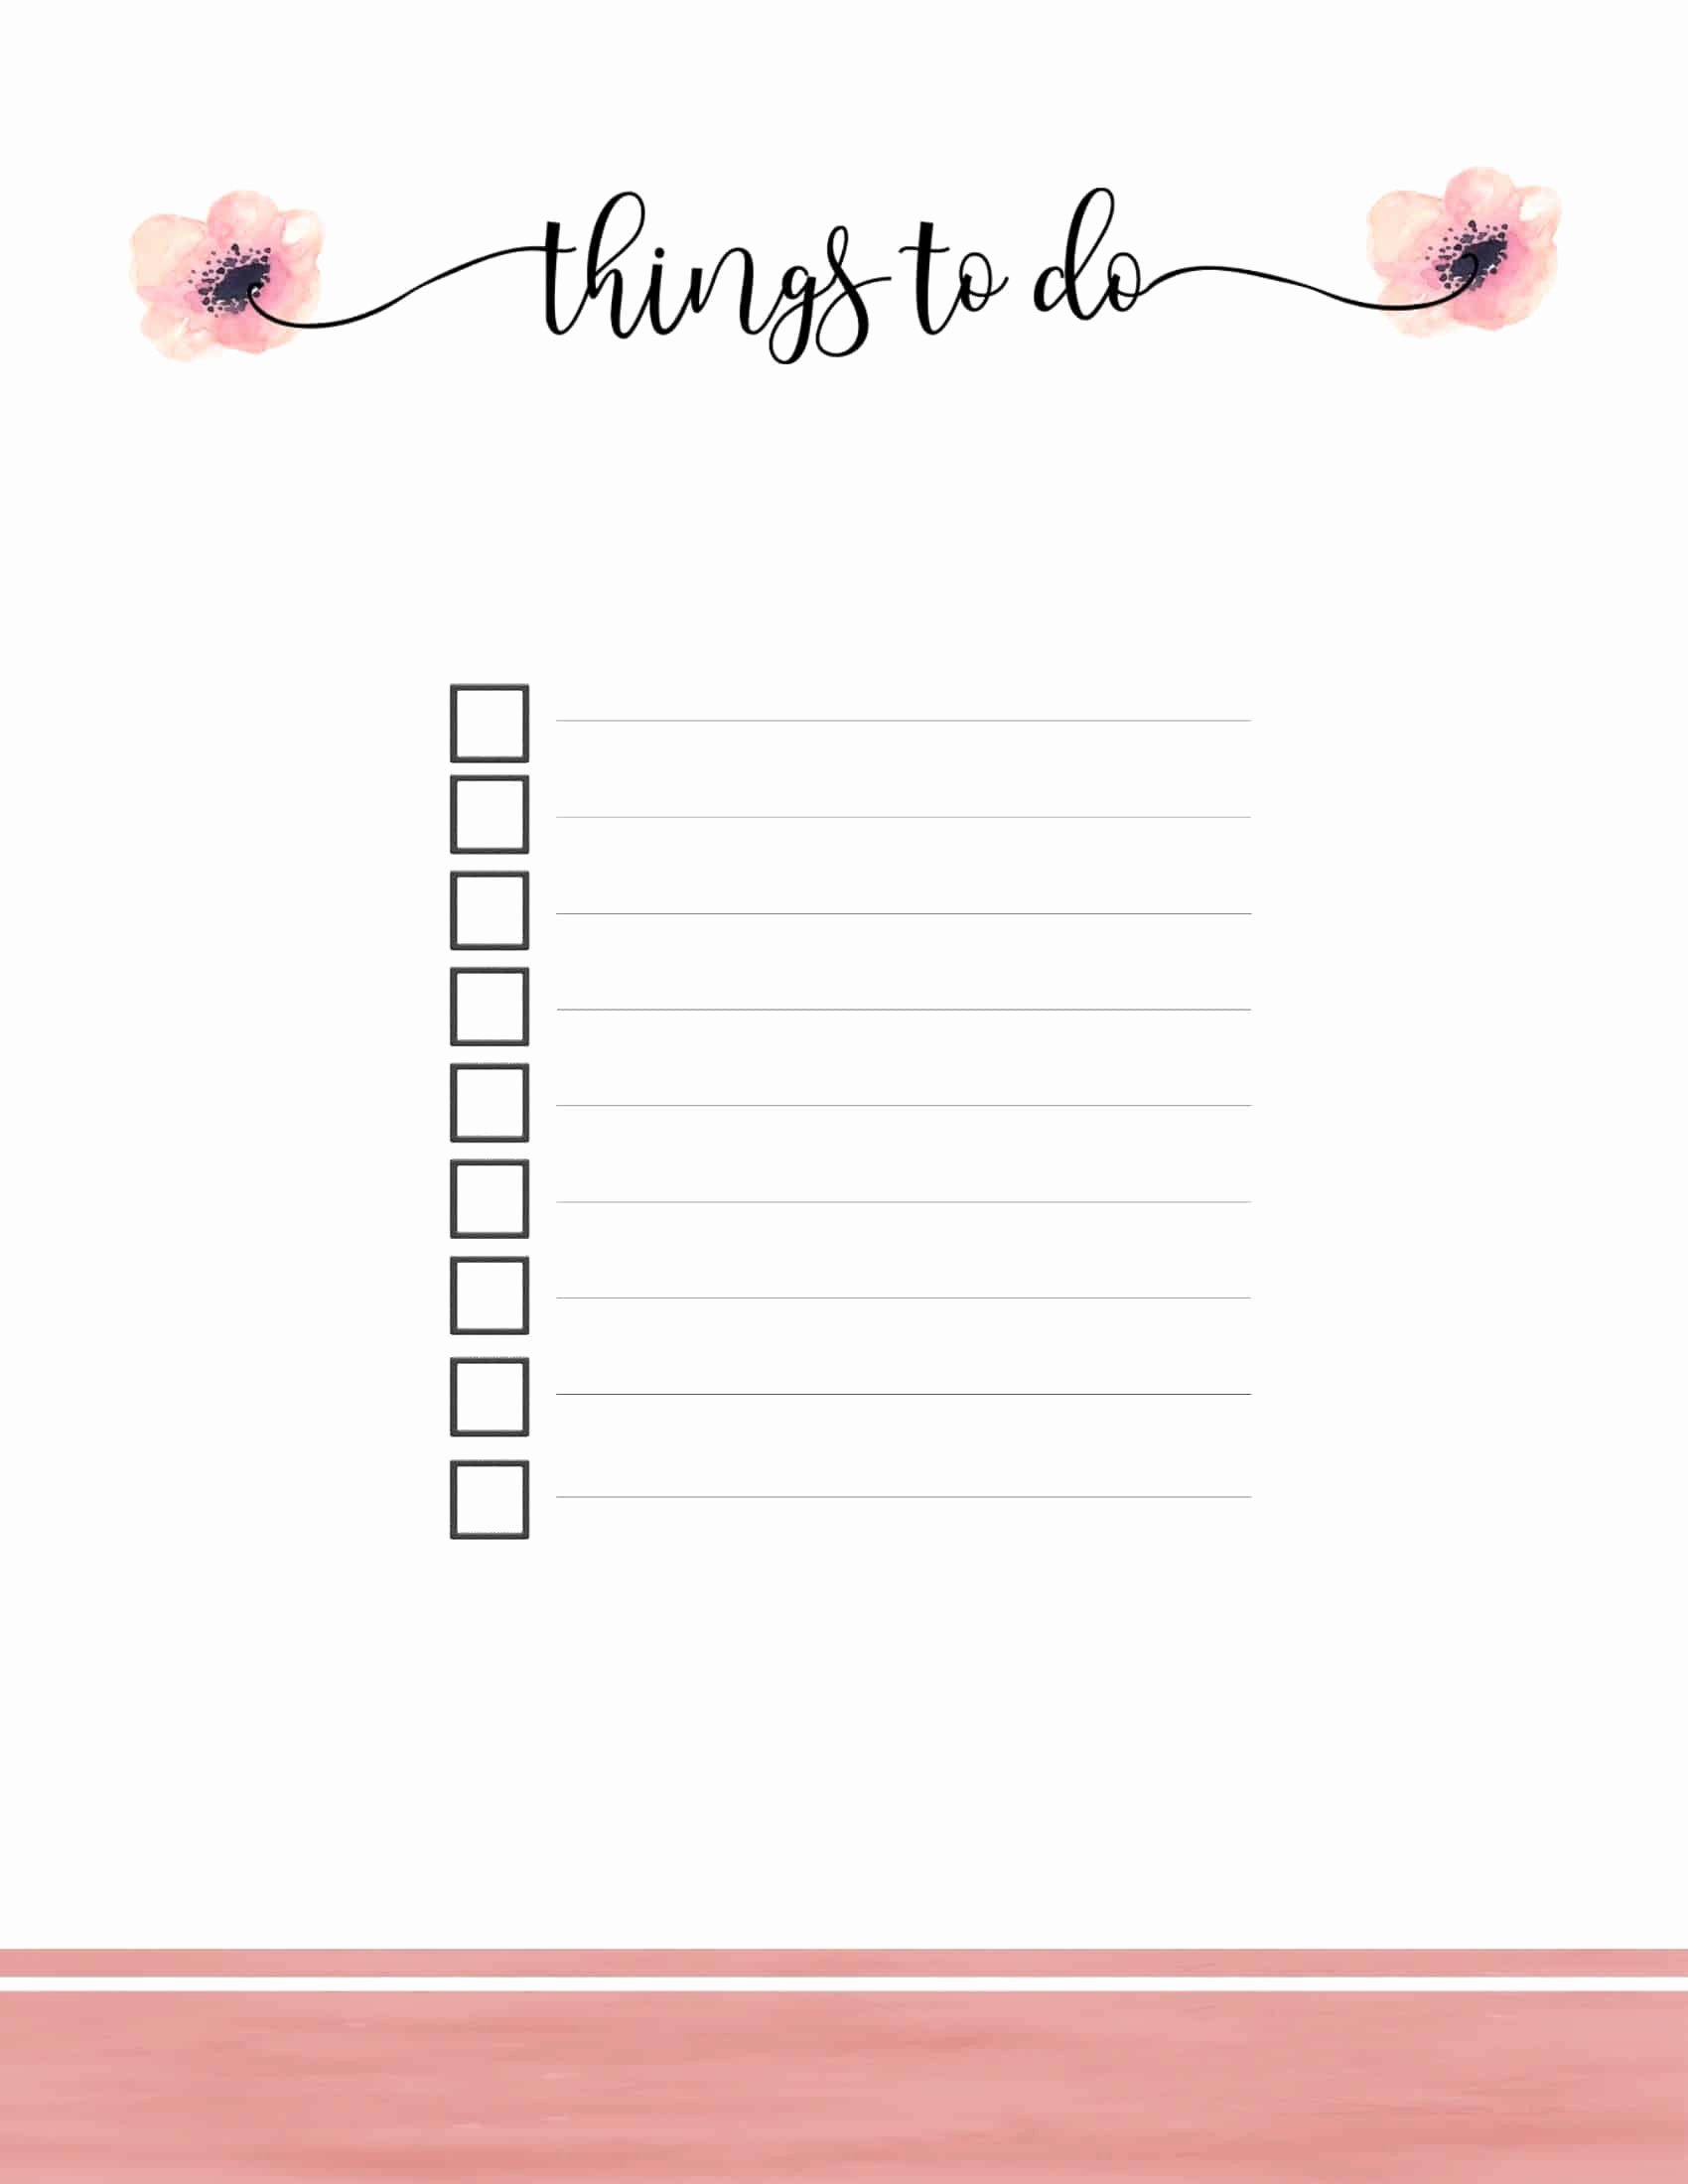 Things to Do List Template Inspirational Free Printable to Do List Print or Use Line